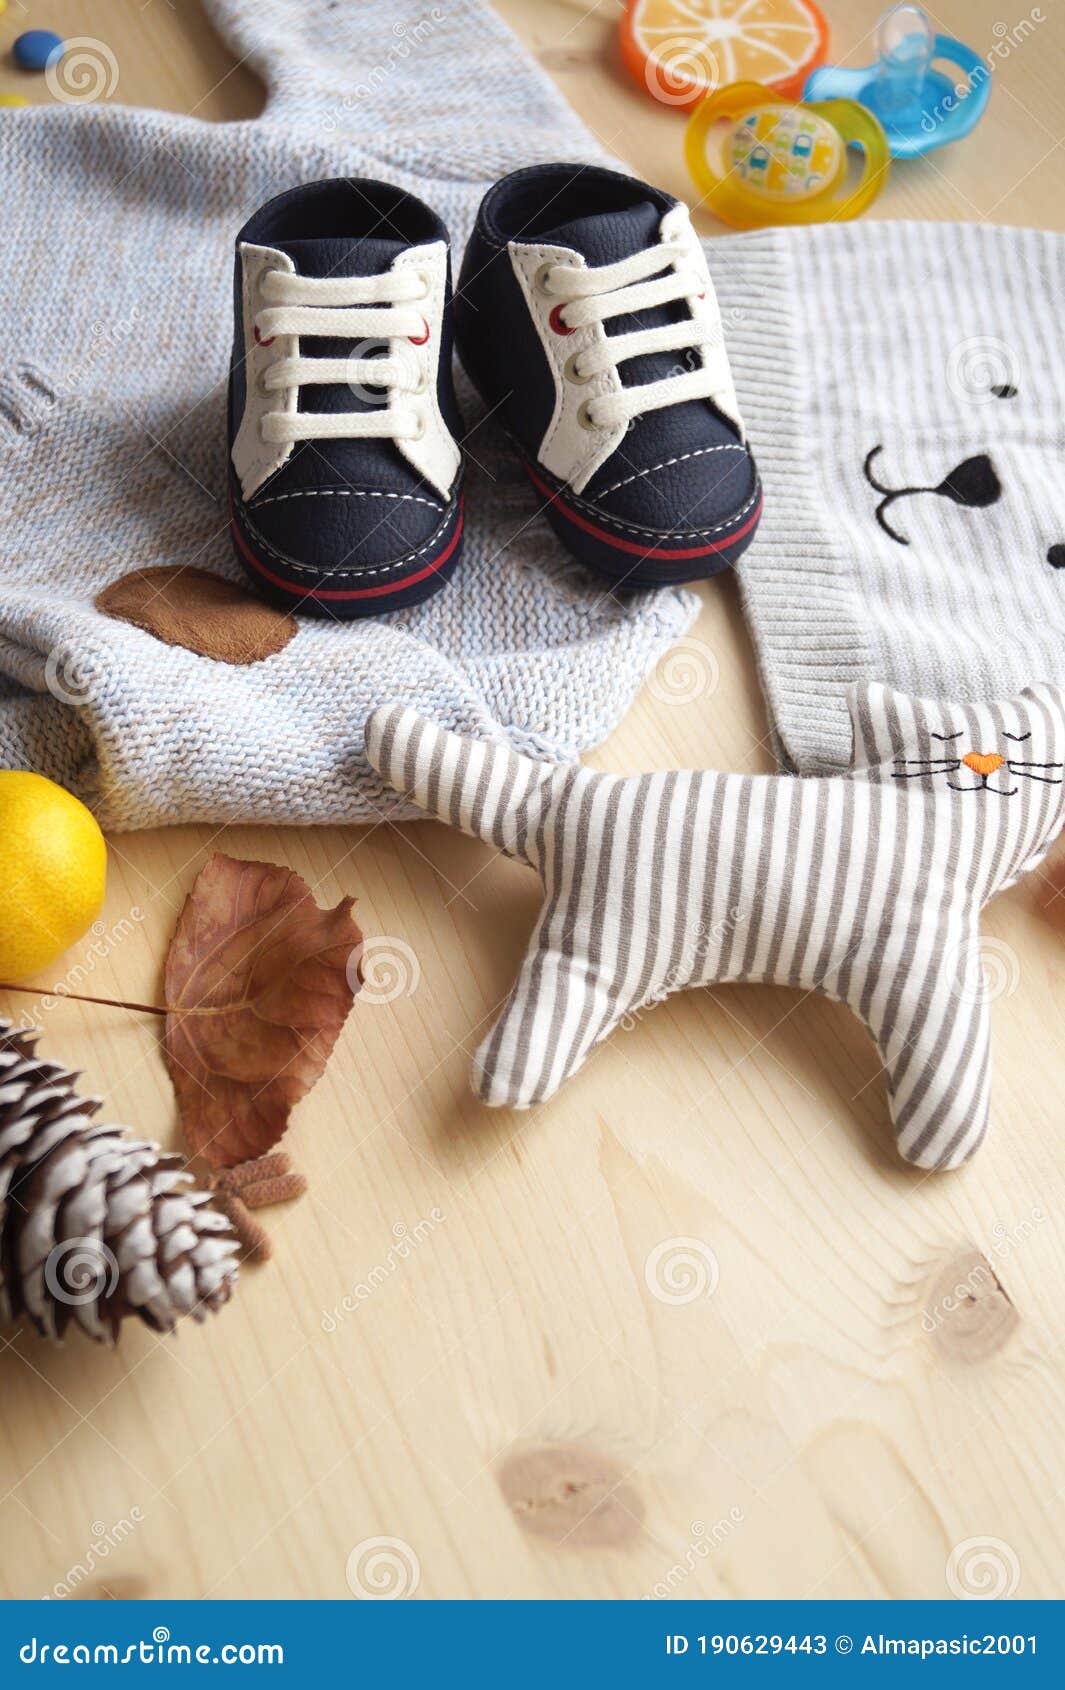 Winter Fall Baby Boy Clothes Stock Image - Image of child, blue: 190629443